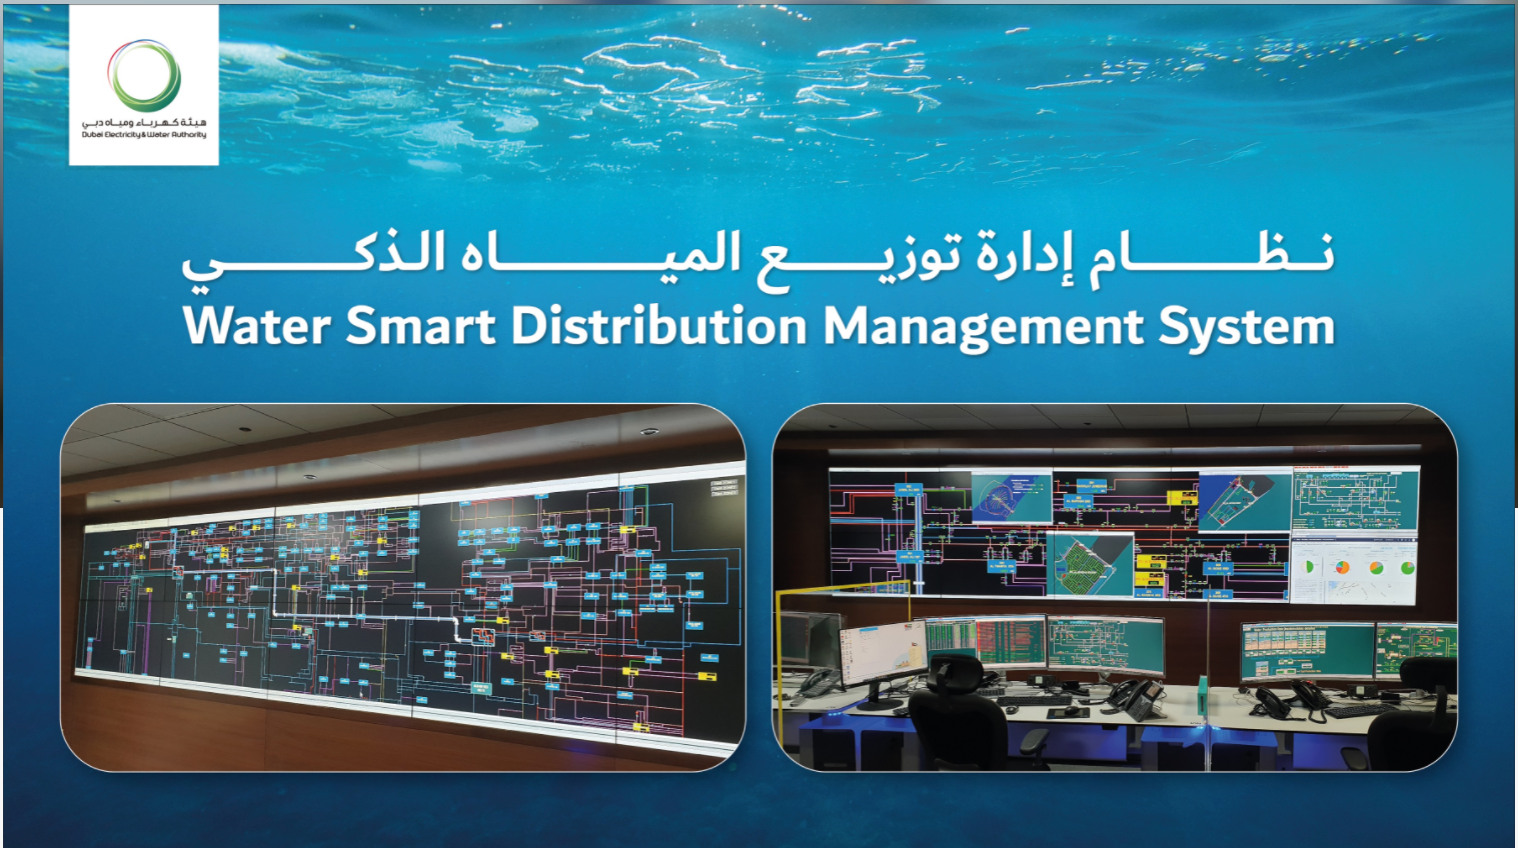 Smart Distribution Management System for reducing water losses